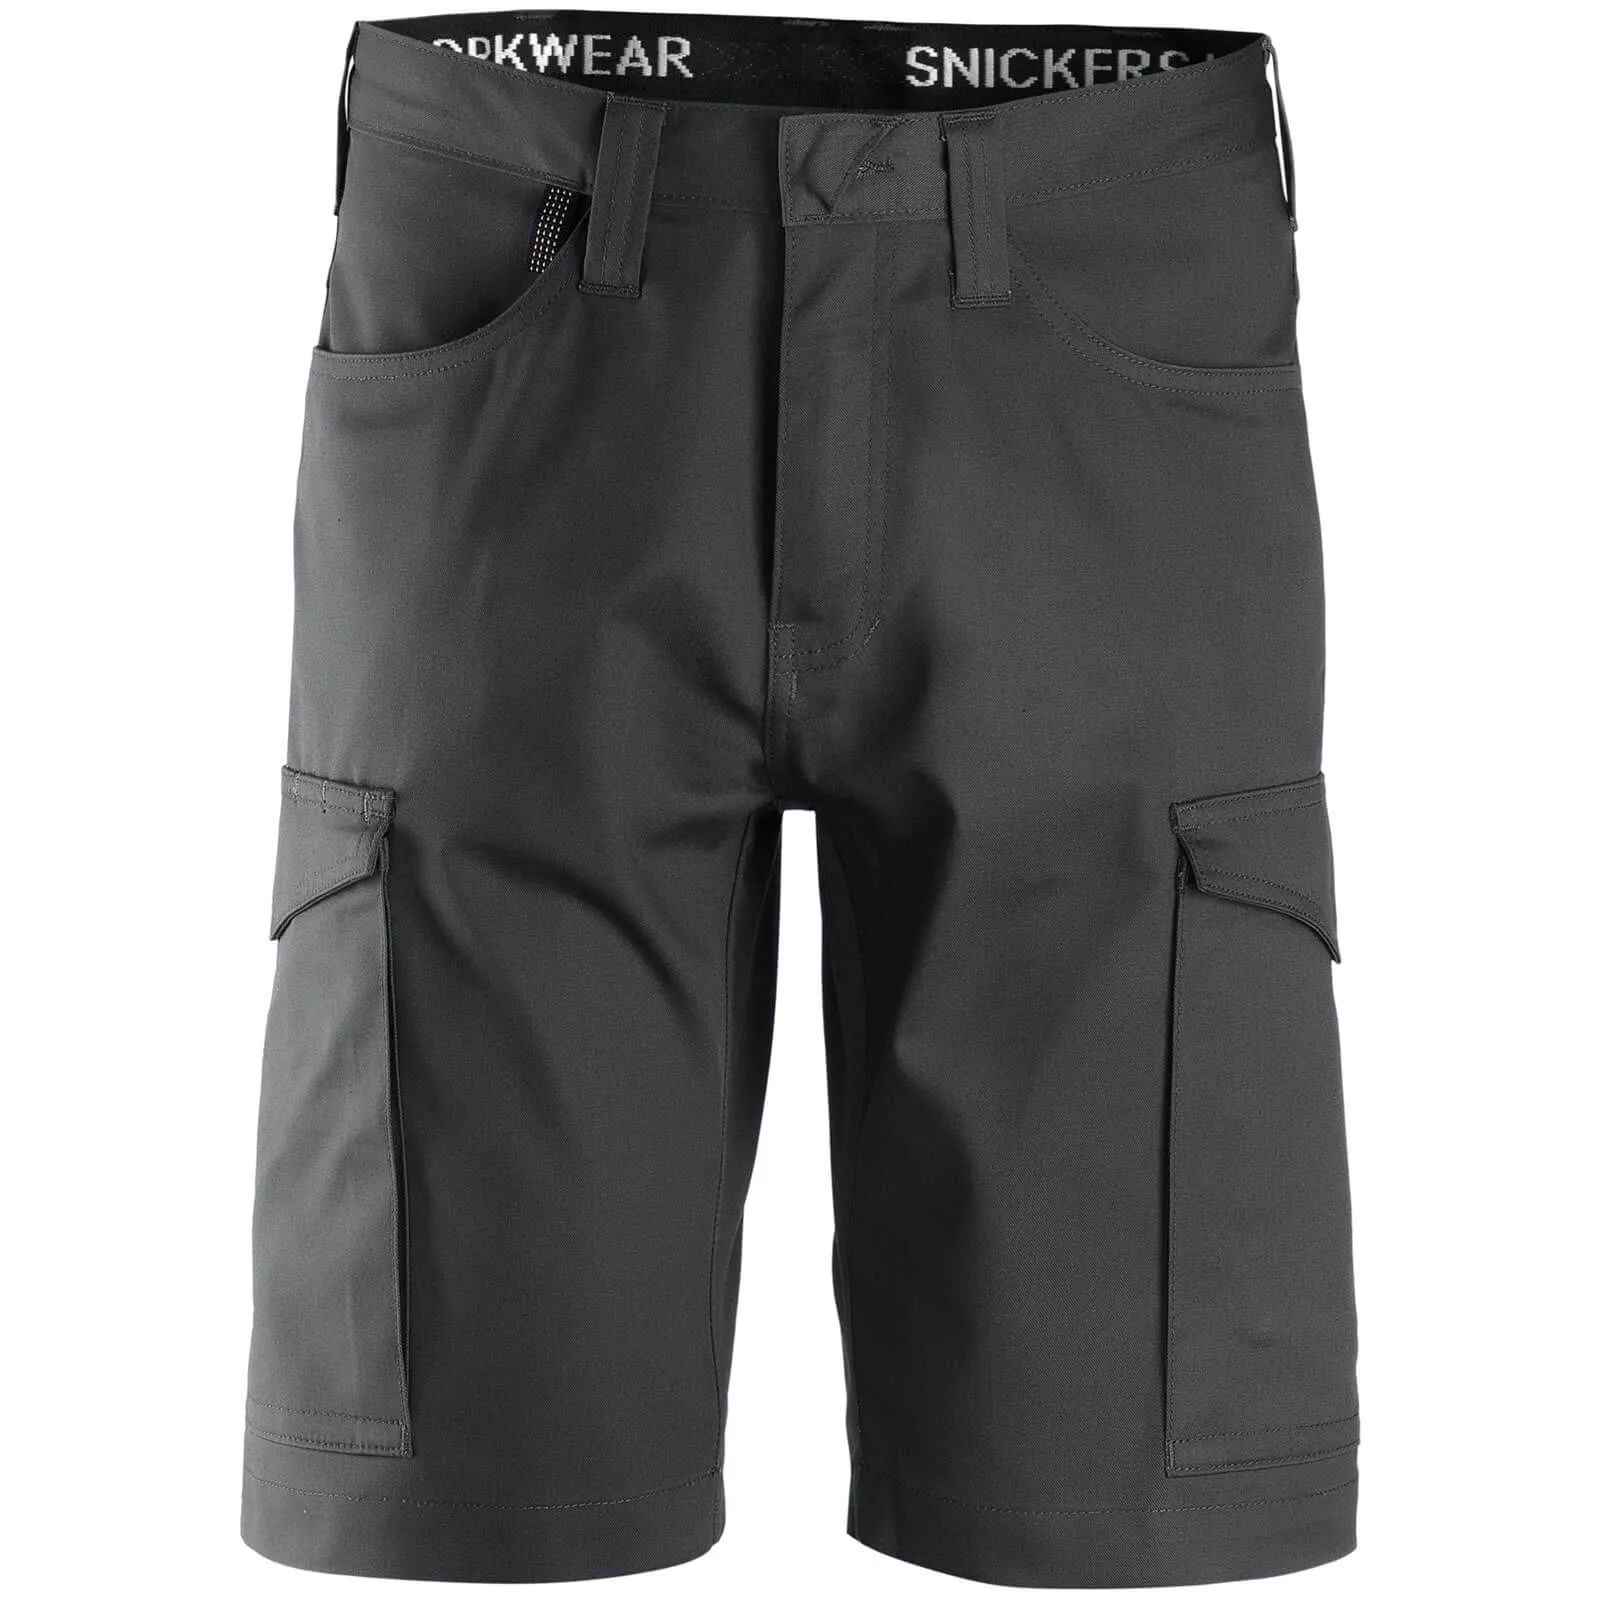 Snickers 6100 Mens Service Shorts - Steel Grey, 31"